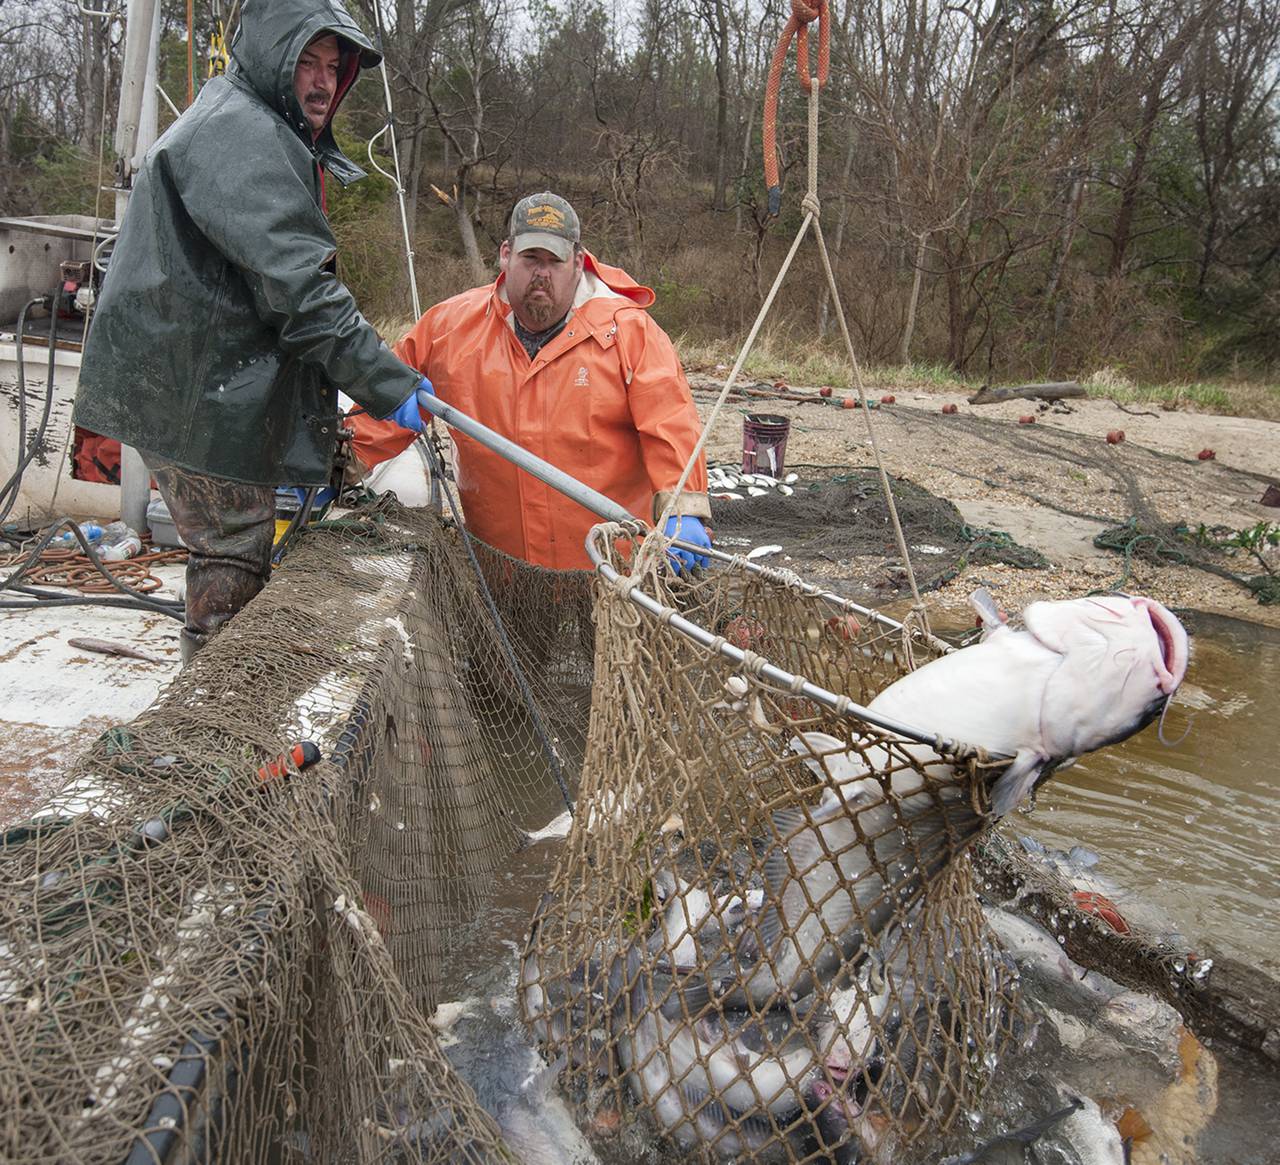 Ten years ago they were catching exclusively channel catfish and now their catch is composed of ~95% blue catfish.   The ecology of the Chesapeake is at risk unless serious measures are taken by the state and federal governments to suppress the populations of these fish.